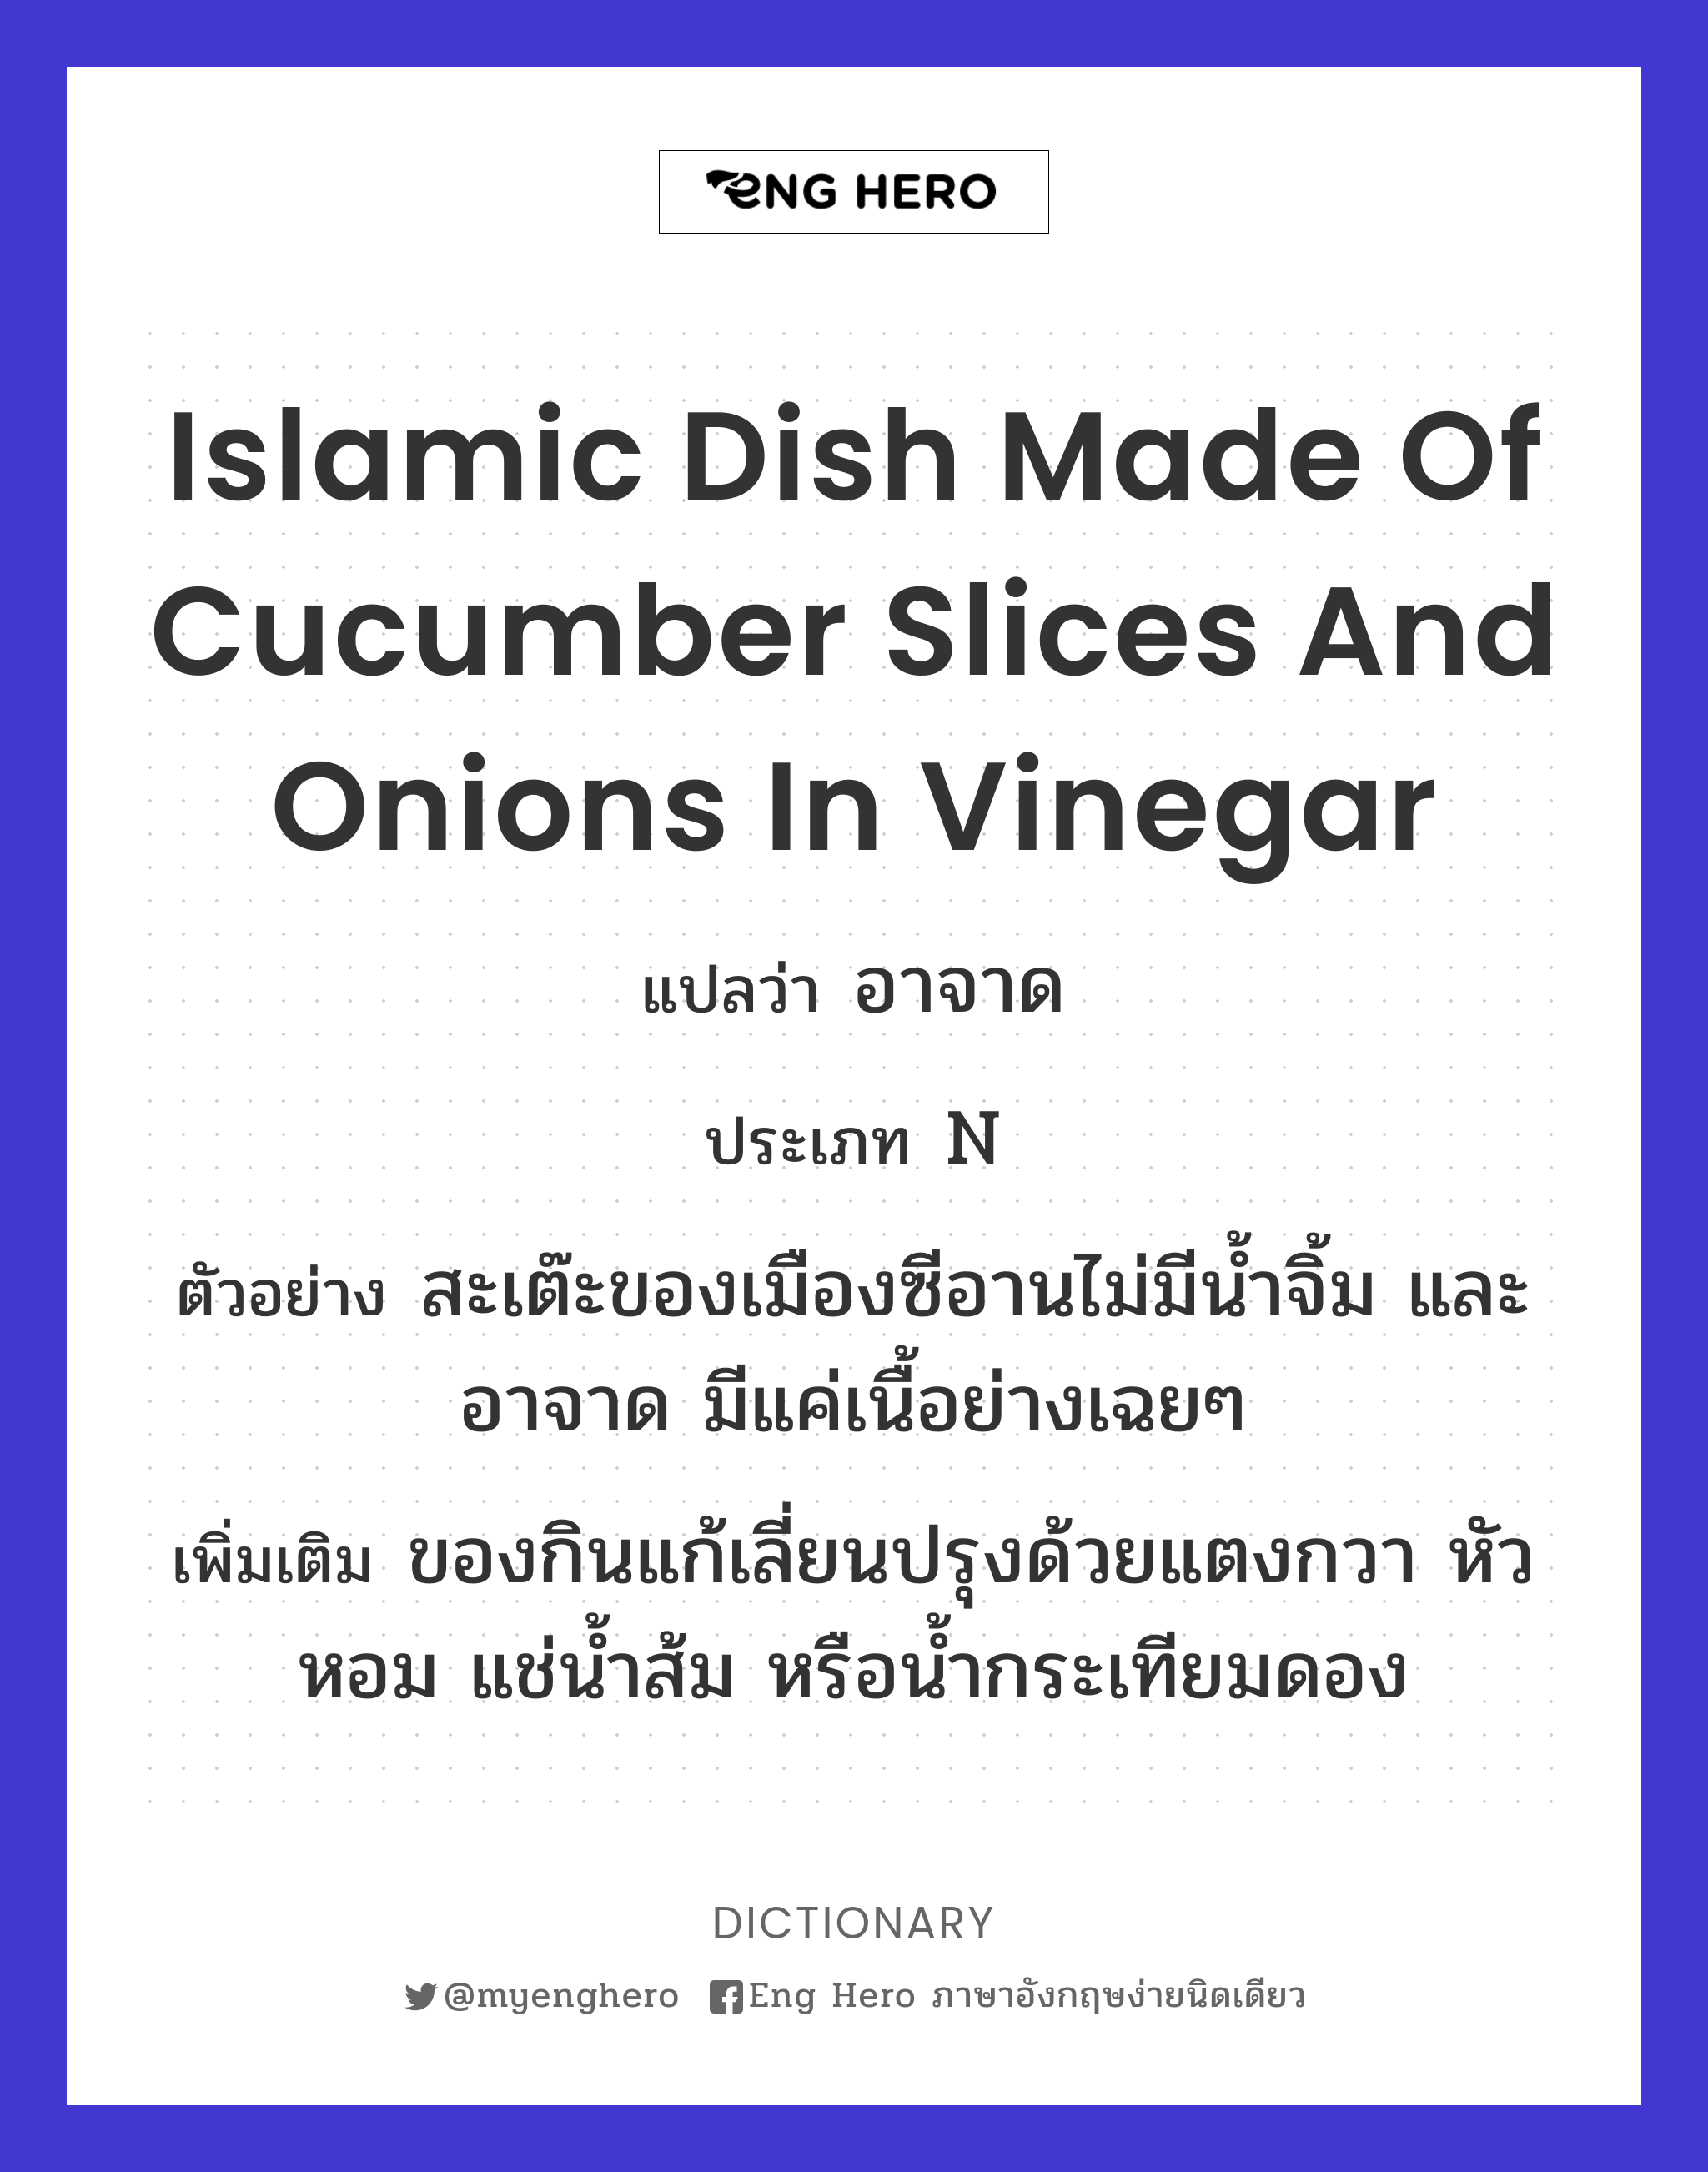 Islamic dish made of cucumber slices and onions in vinegar